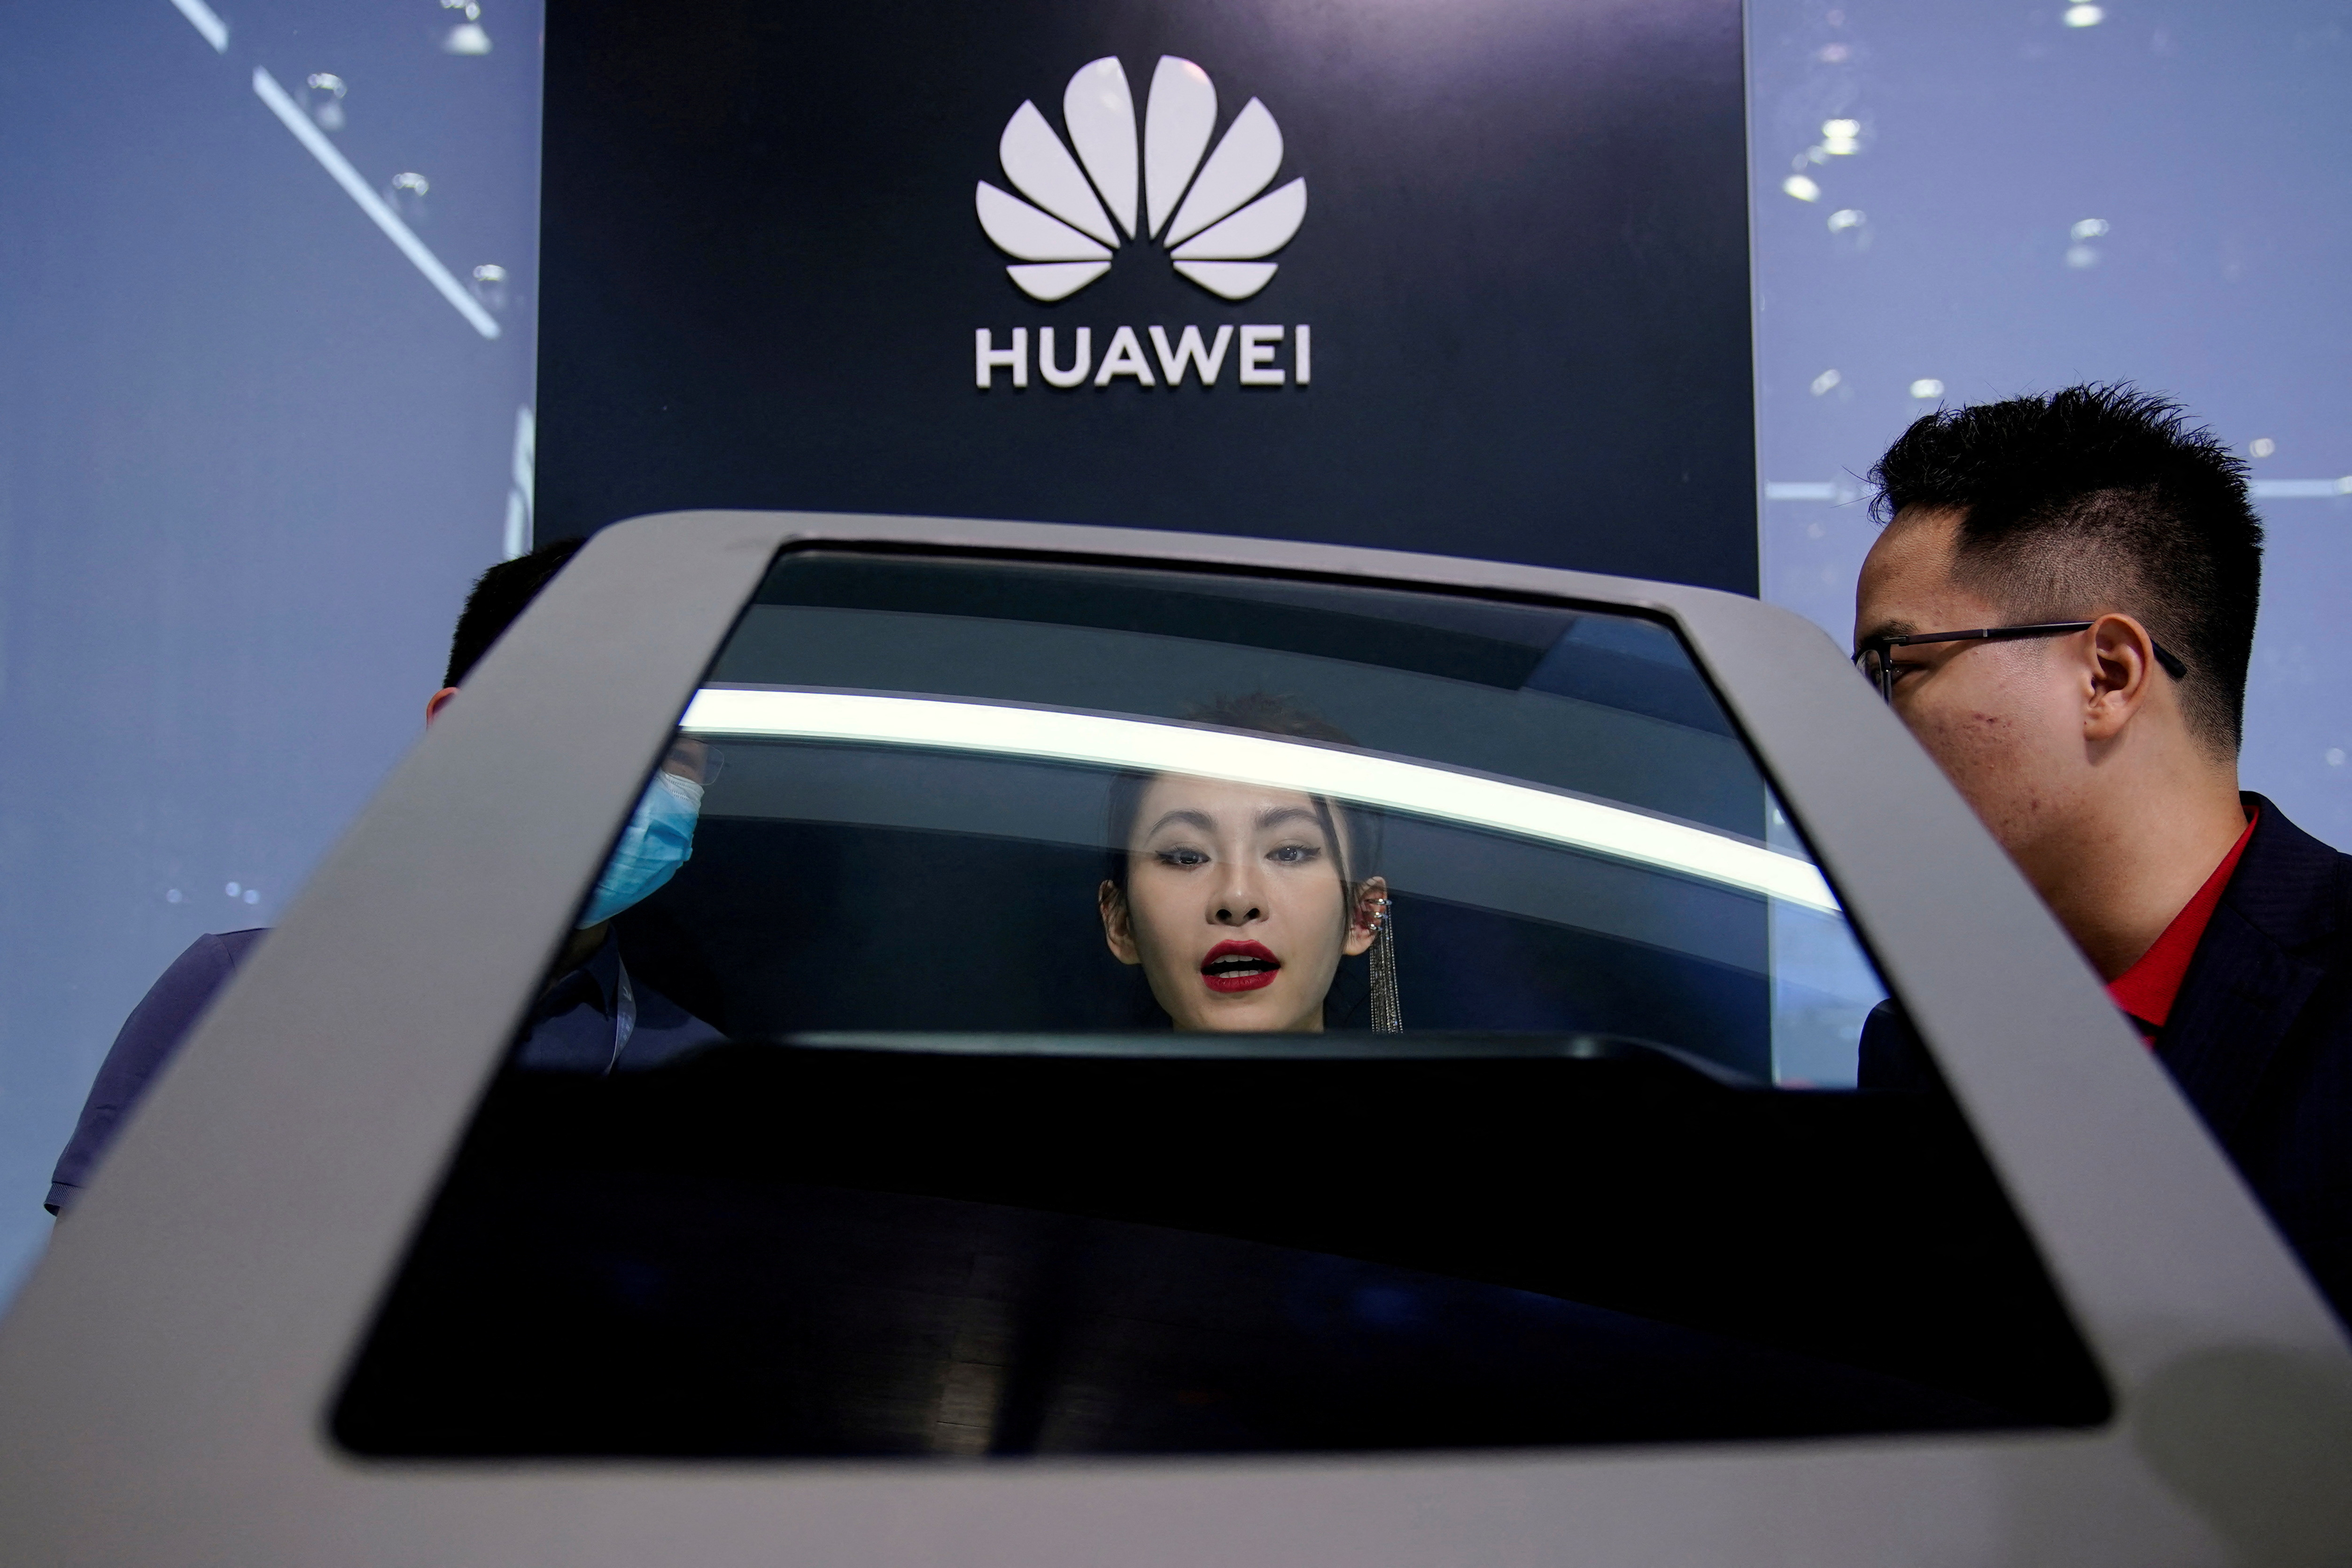 Exclusive: Huawei approaches Audi, Mercedes about investing in its